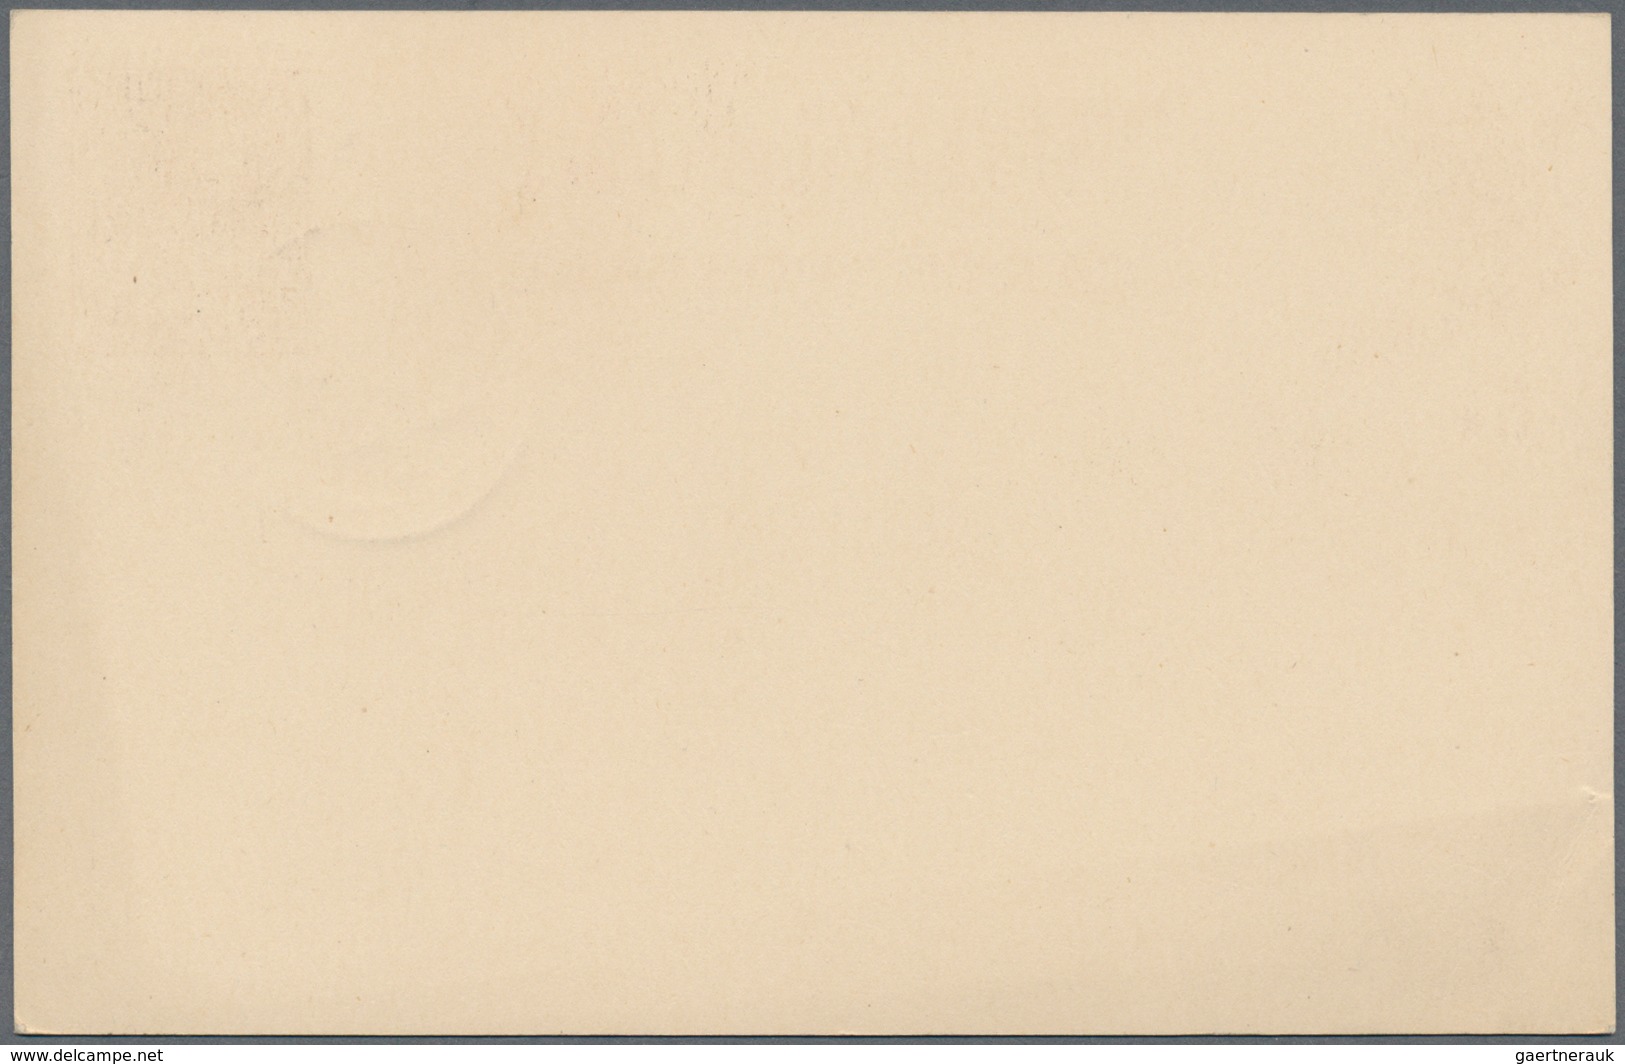 Thailand - Ganzsachen: 1935: Postal Stationery Card 2s. Brown, Issued In 1933, Overprinted And Frank - Thailand